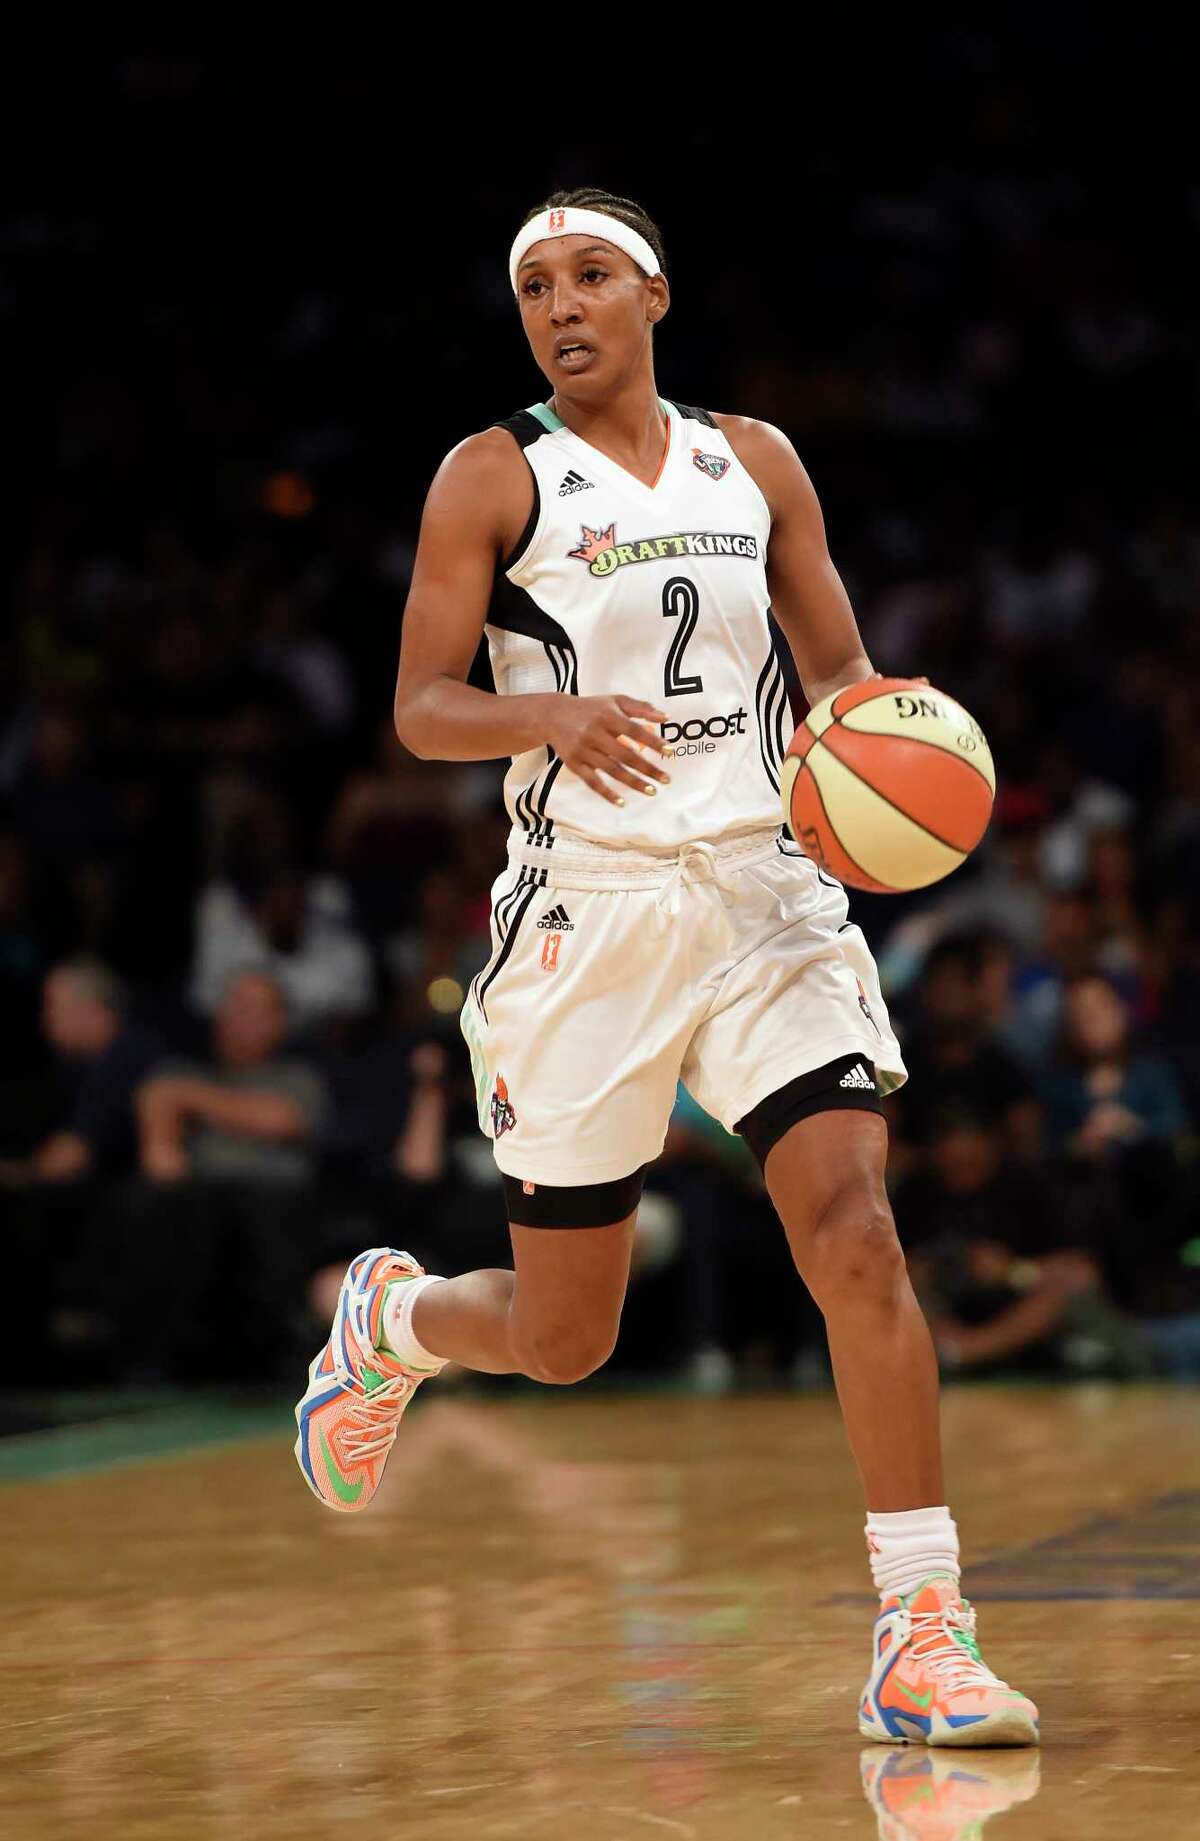 Former WNBA player Candice Wiggins had told a San Diego newspaper that the league was a toxic environment for her because she had been bullied.﻿